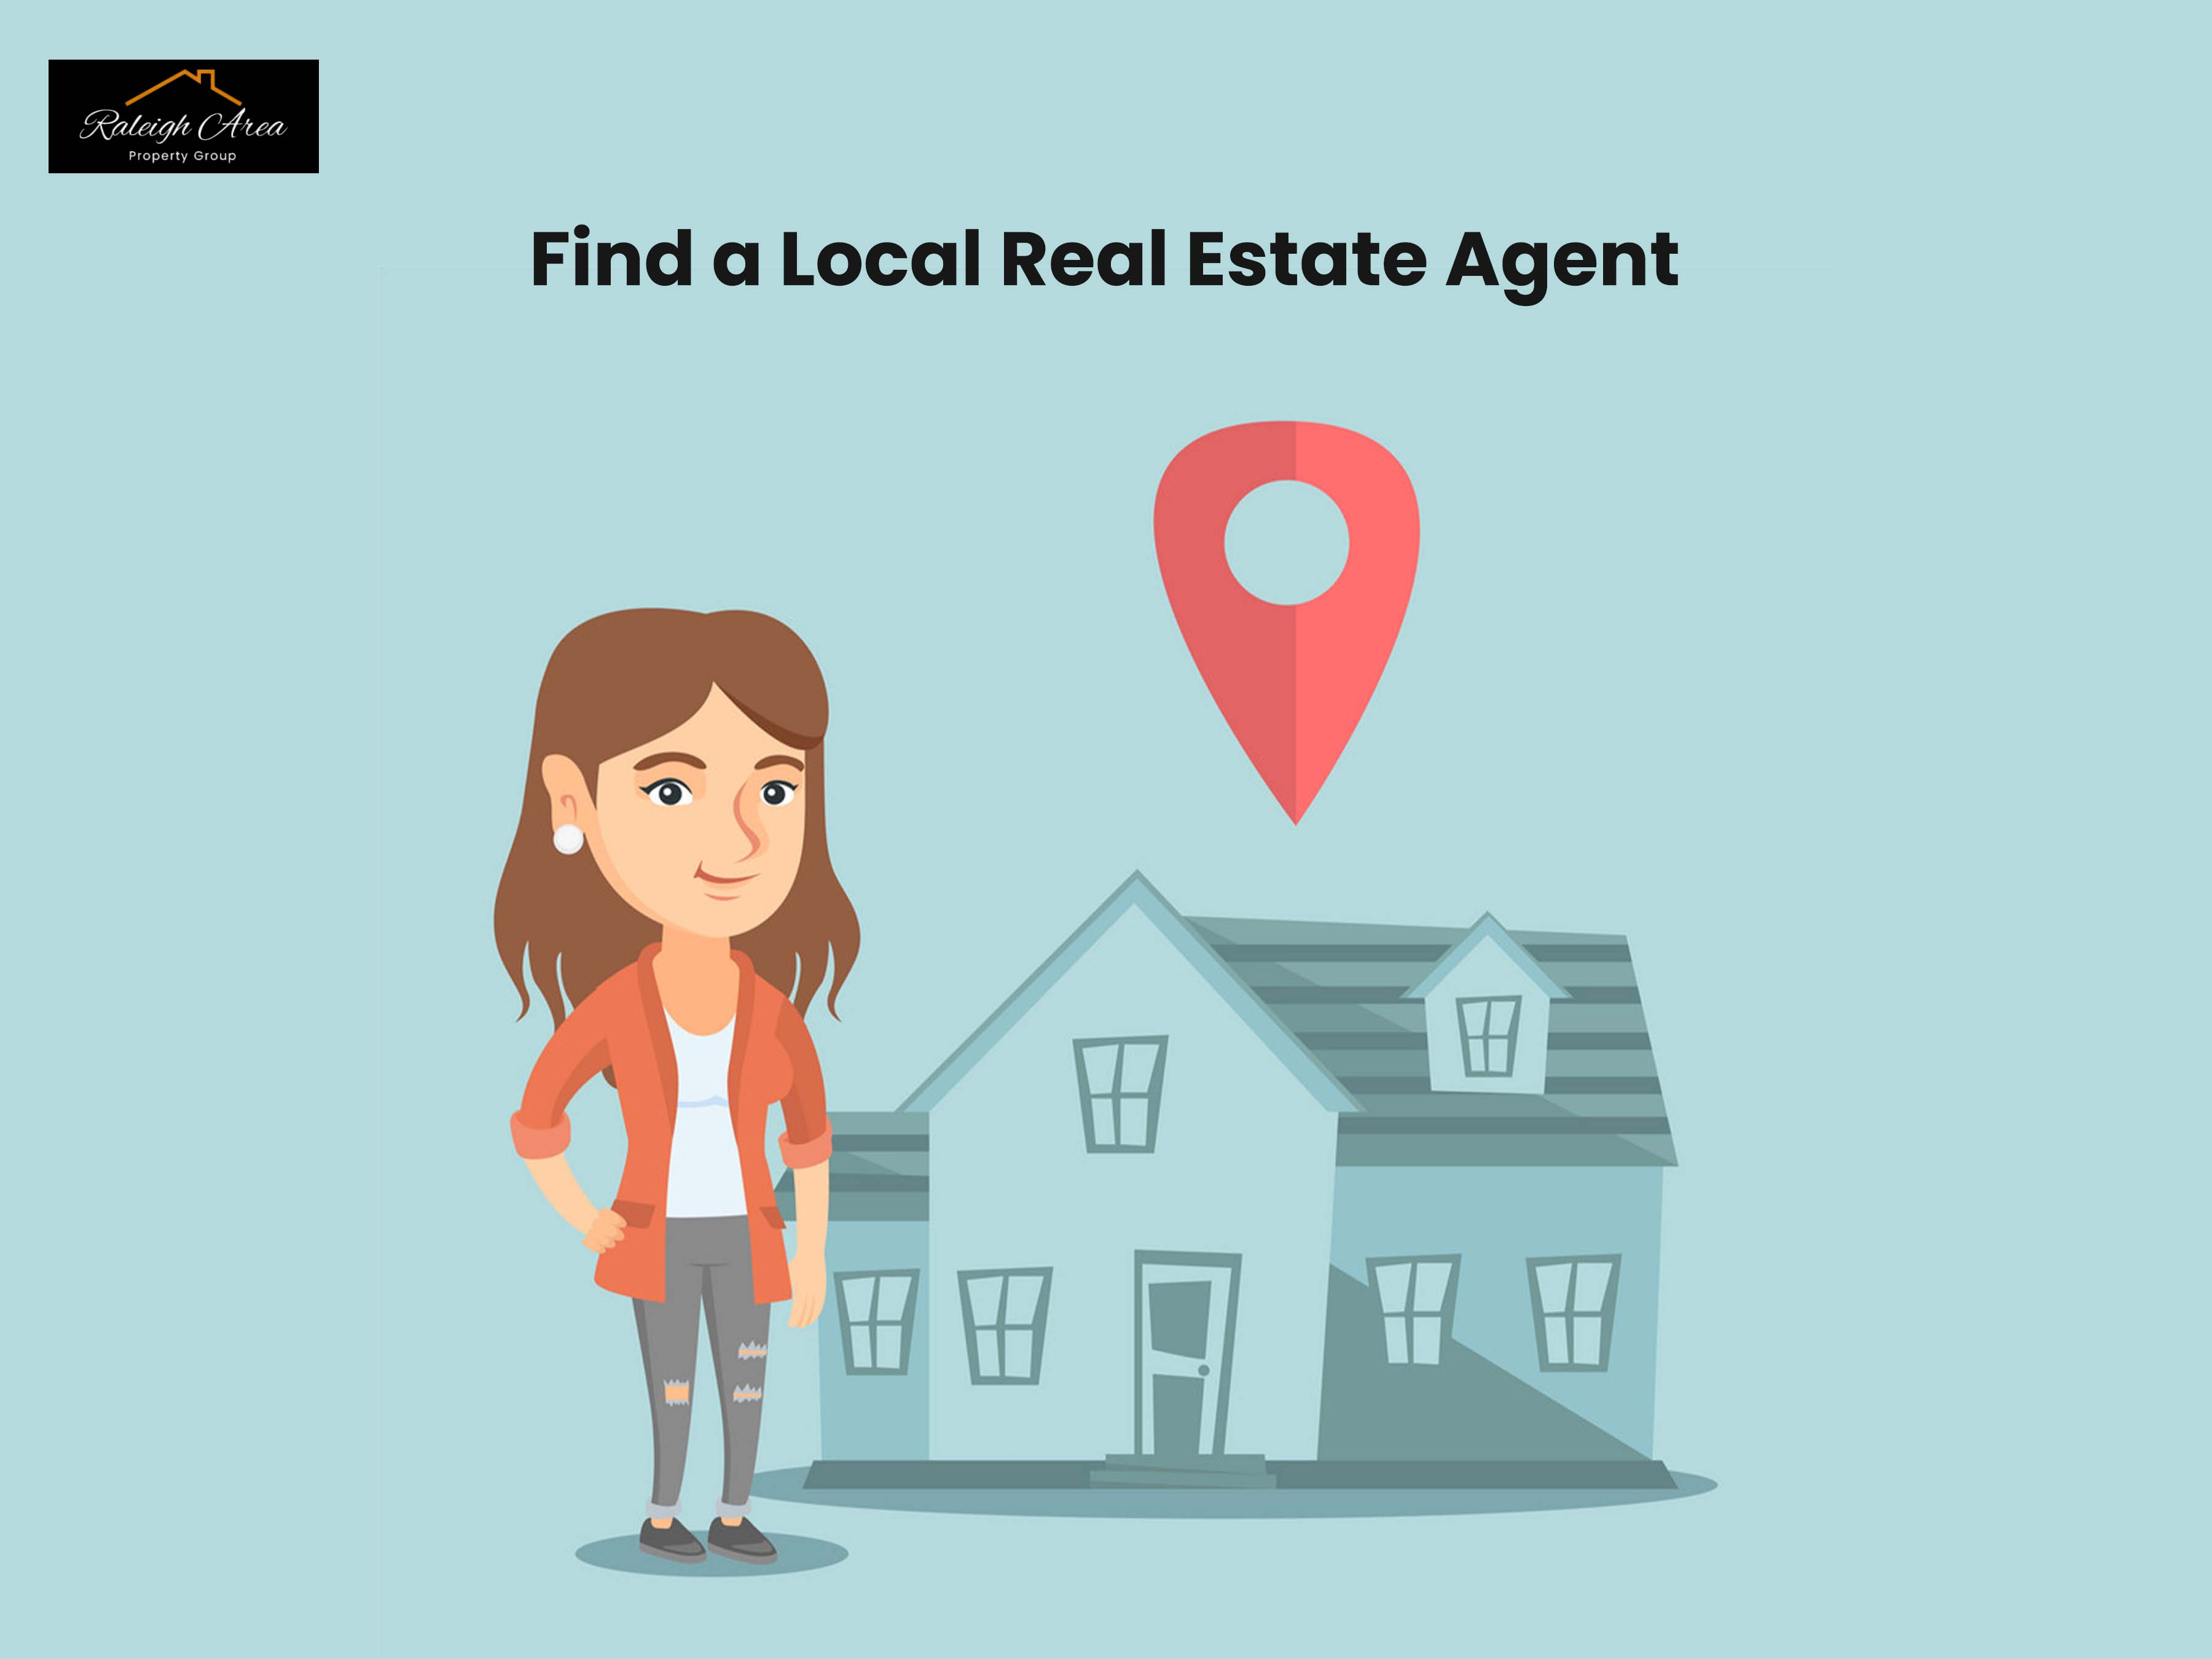 Find a Local Real Estate Agent